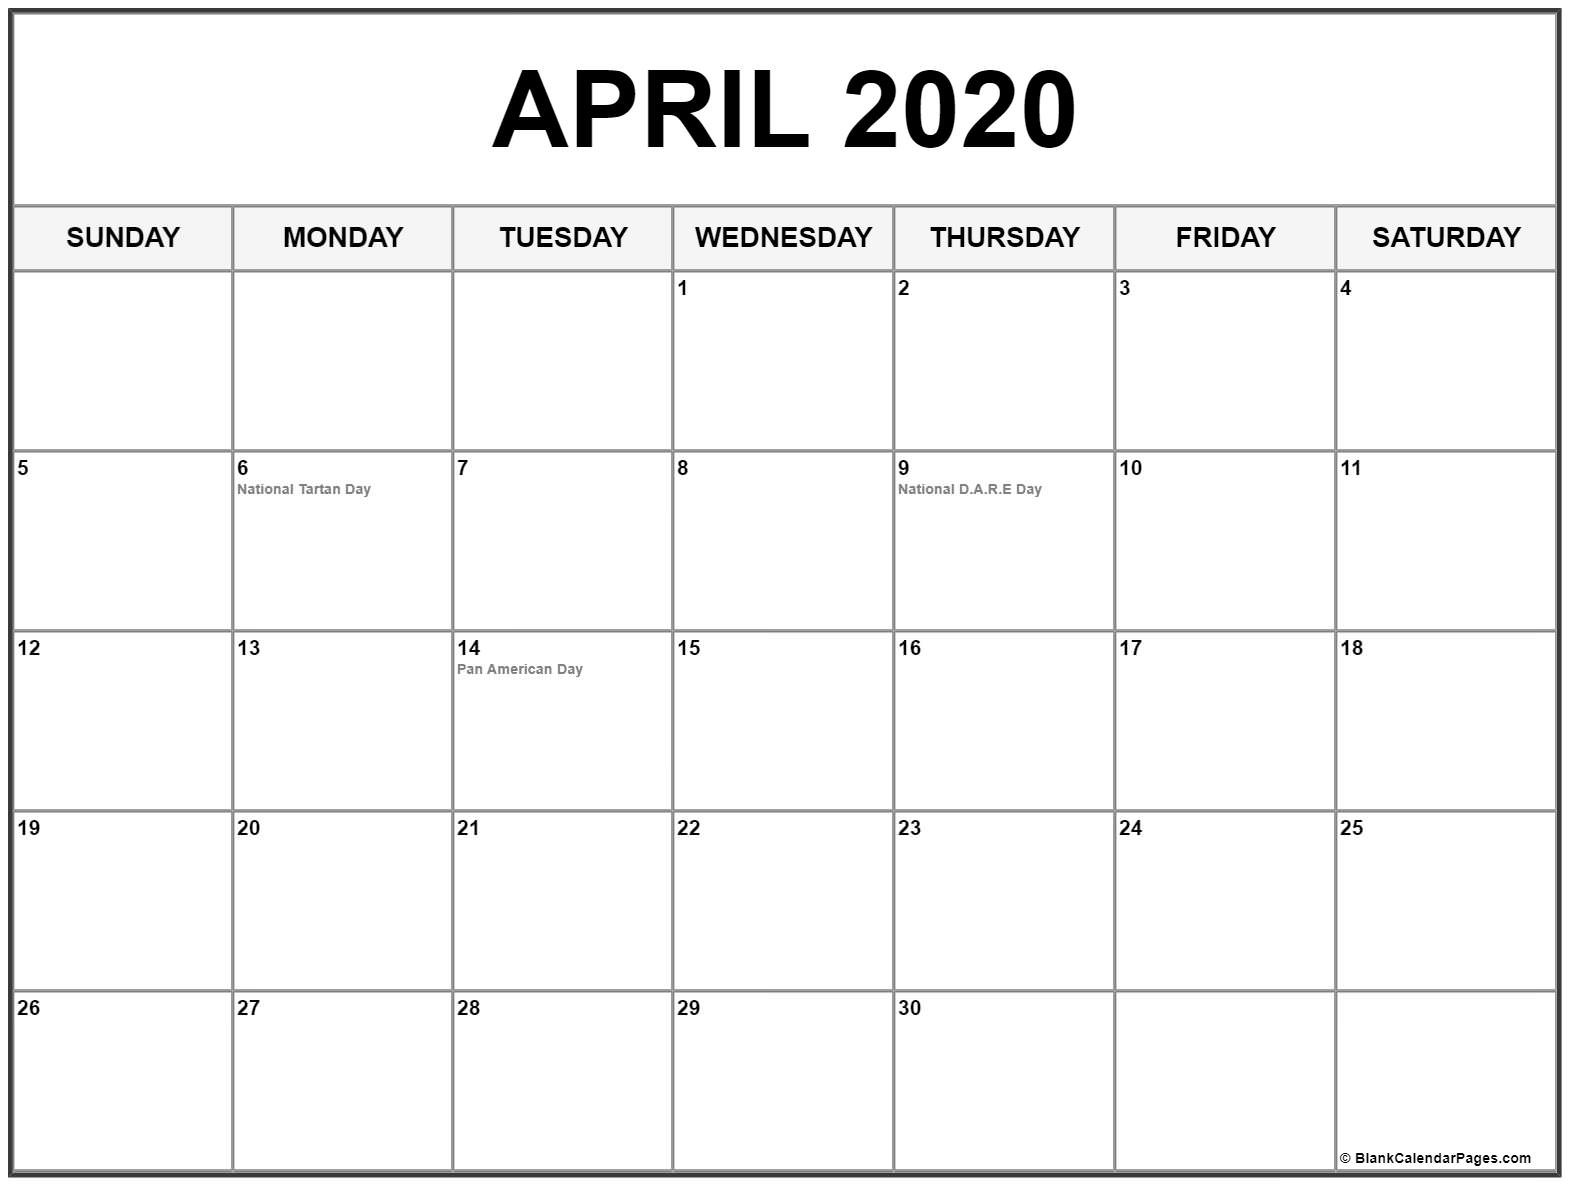 collection of april 2020 calendars with holidays